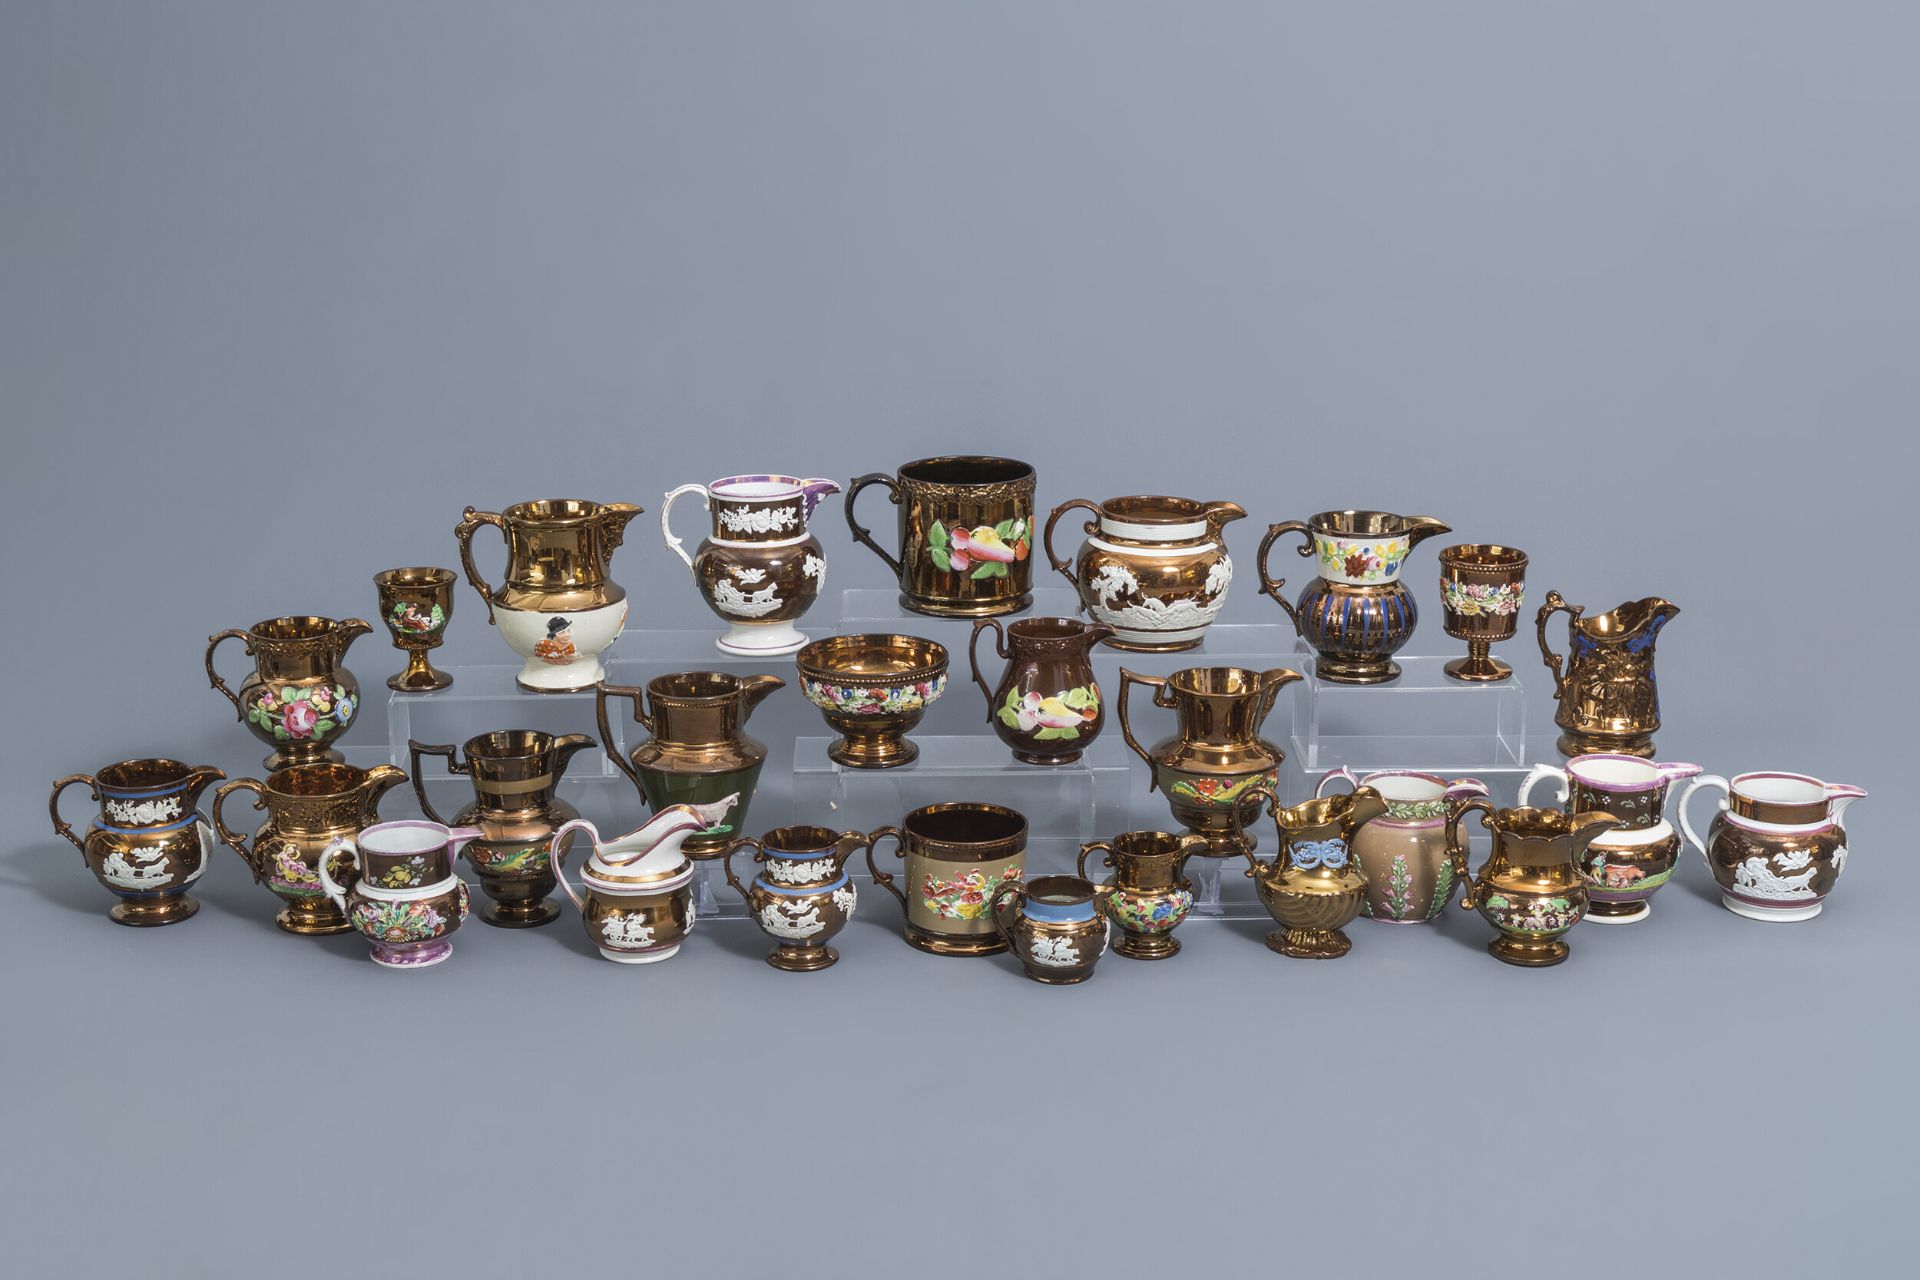 A varied collection of English lustreware items with relief design, 19th C.